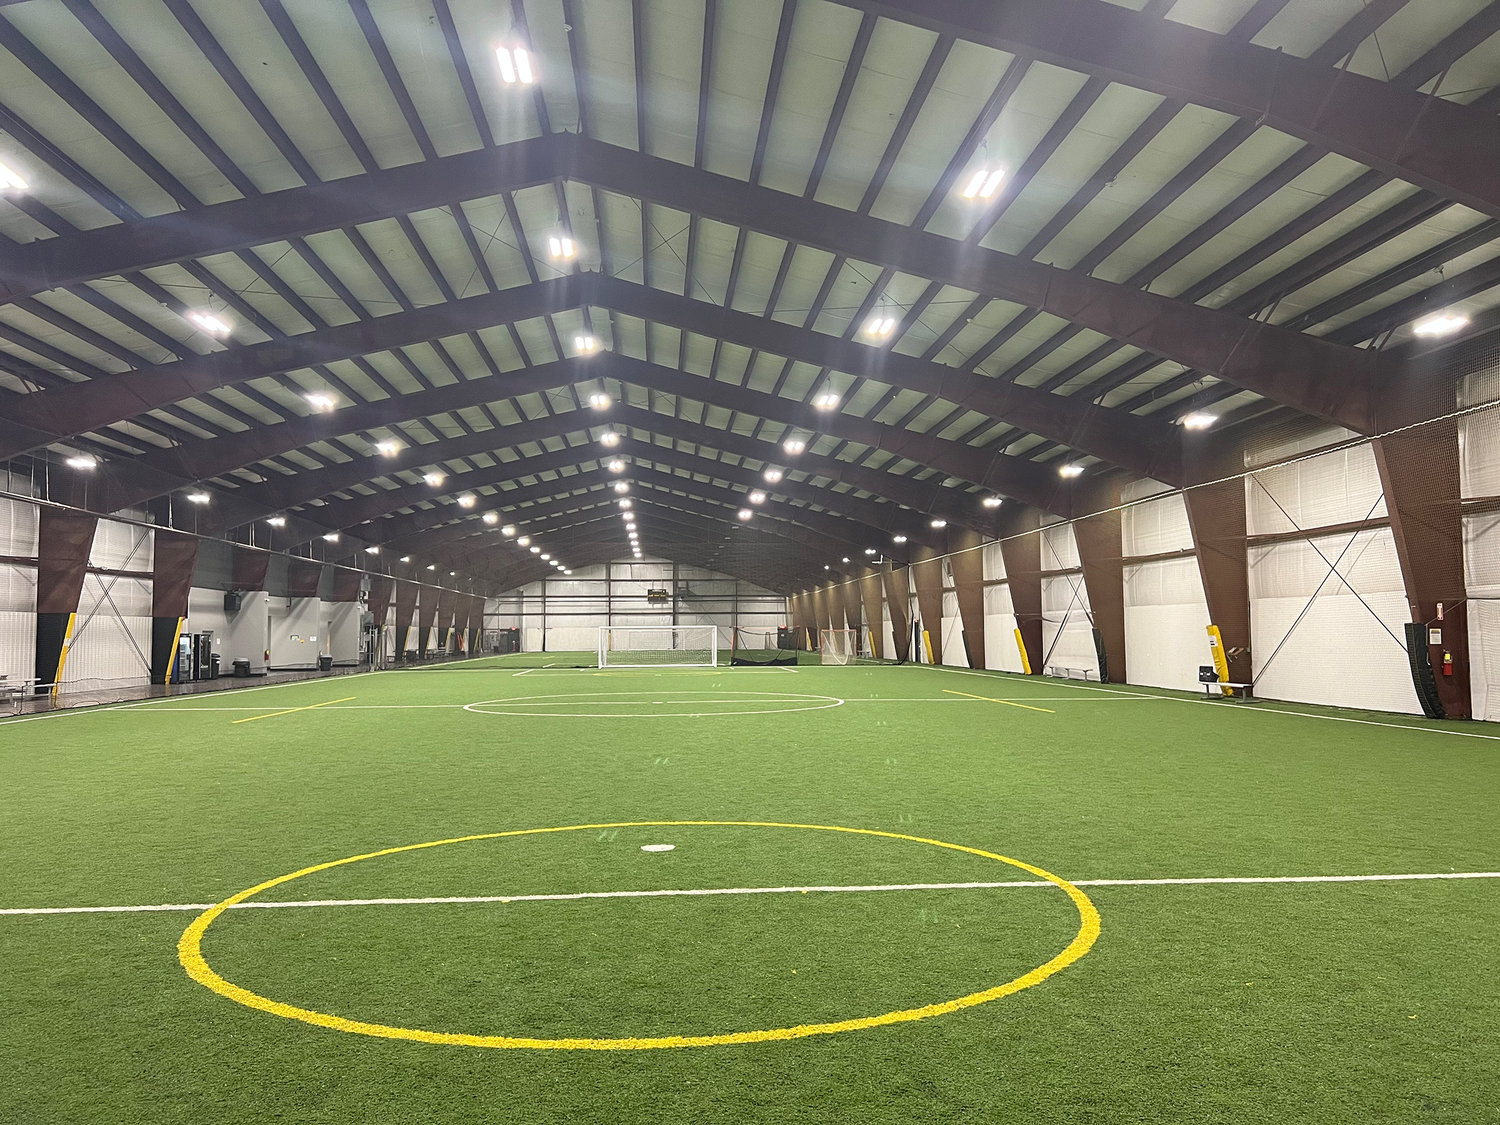 ICAN renovated the former Rising Stars sports complex in Westmoreland and opened Elevate CNY in November 2022.